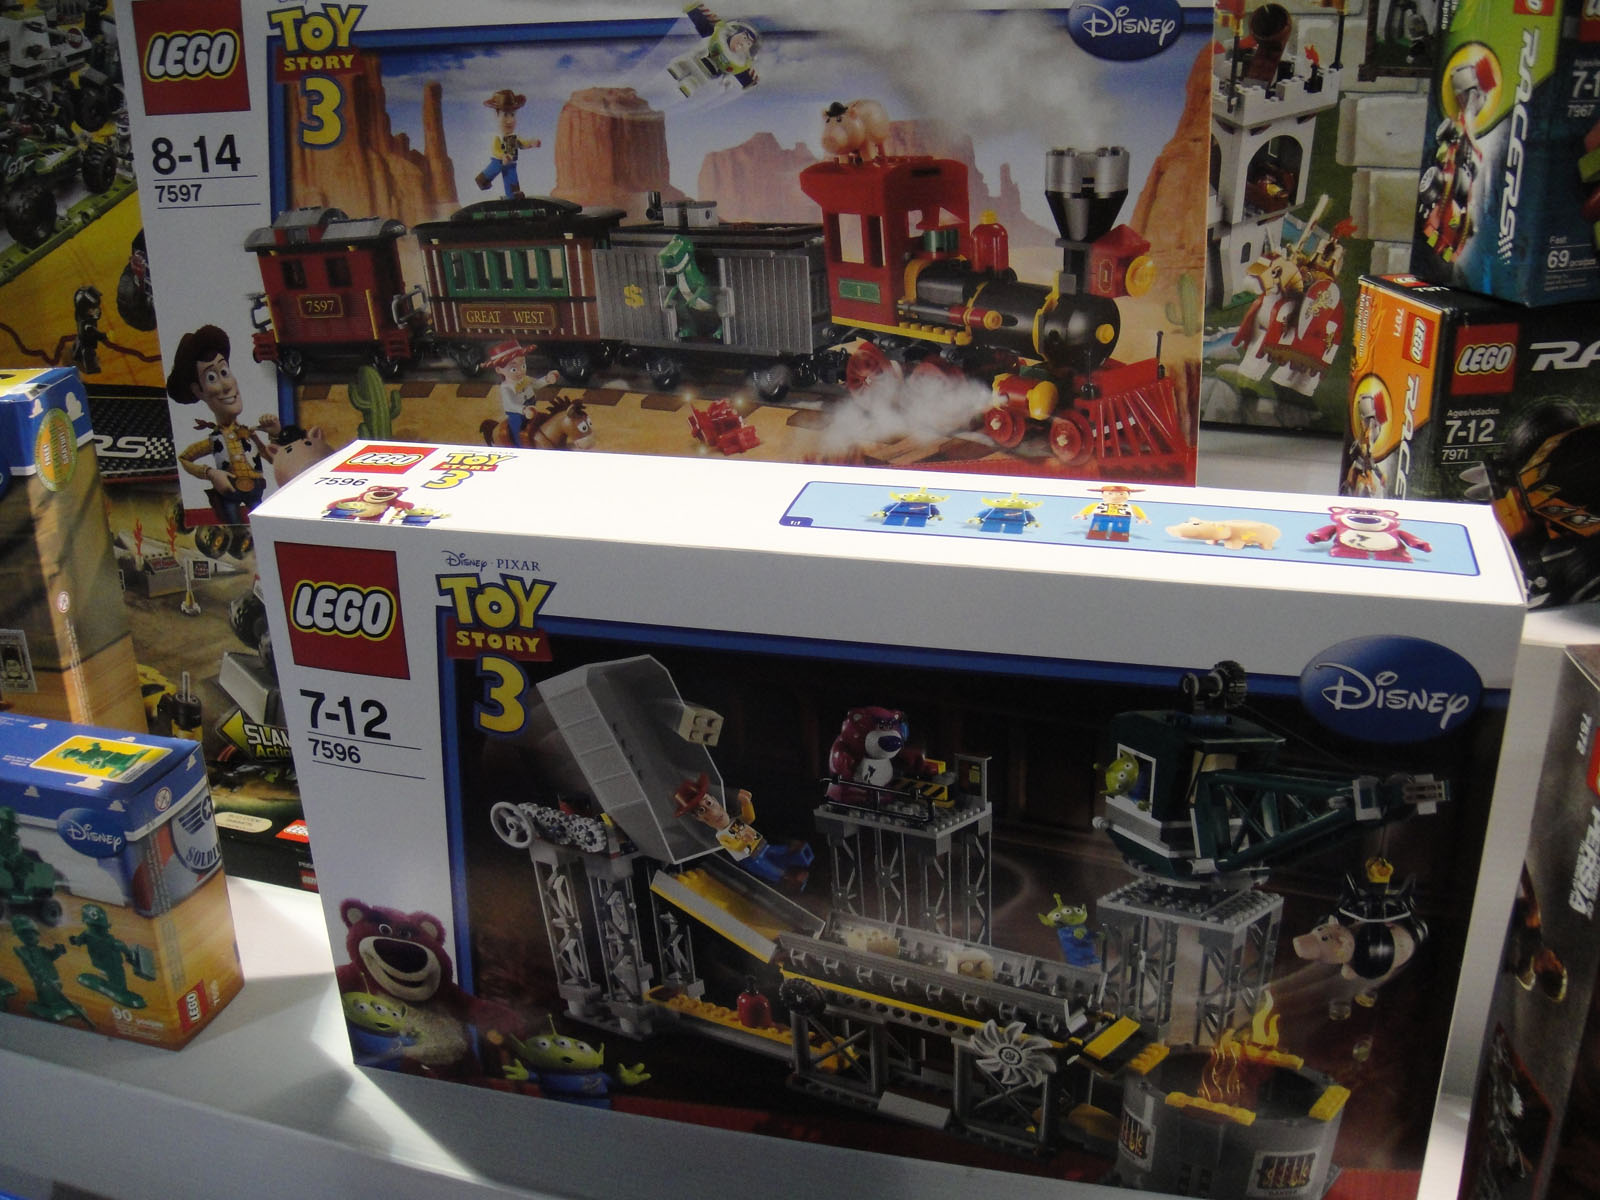 the display case contains a lego model of the disneyland world